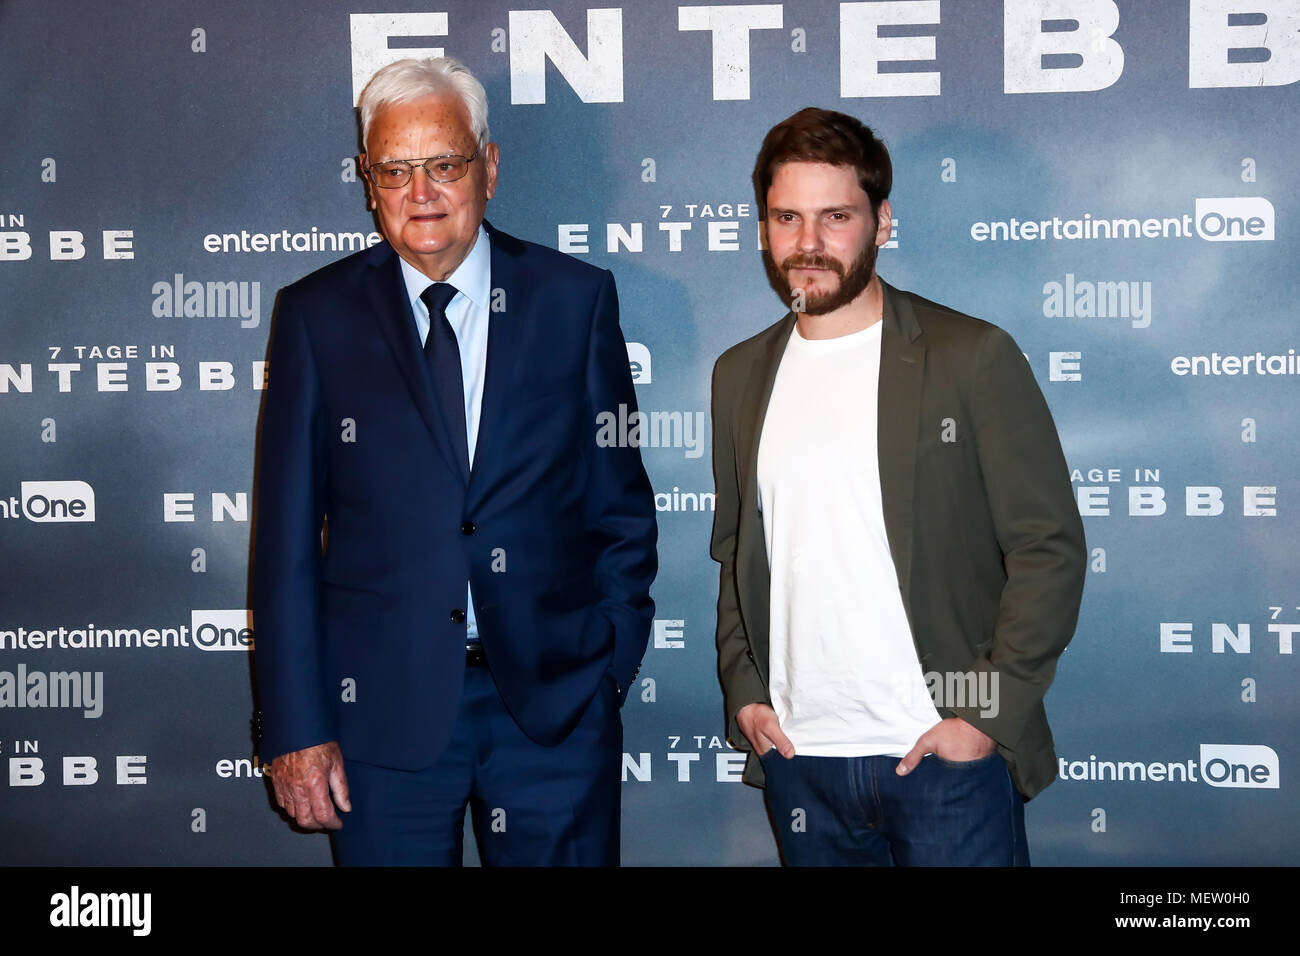 Berlin, Germany, 23.4.18, Daniel Bruehl (Actor, Plays Wilfried Boese) - Jacques Lemoine (Contemporary witness, flight engineer of the Air France machine) attend Photocall Entebbe ( German: 7 Tage in Entebbe ), Kino in der Kulturbrauerei Credit: Holger Much/Alamy Live News Stock Photo